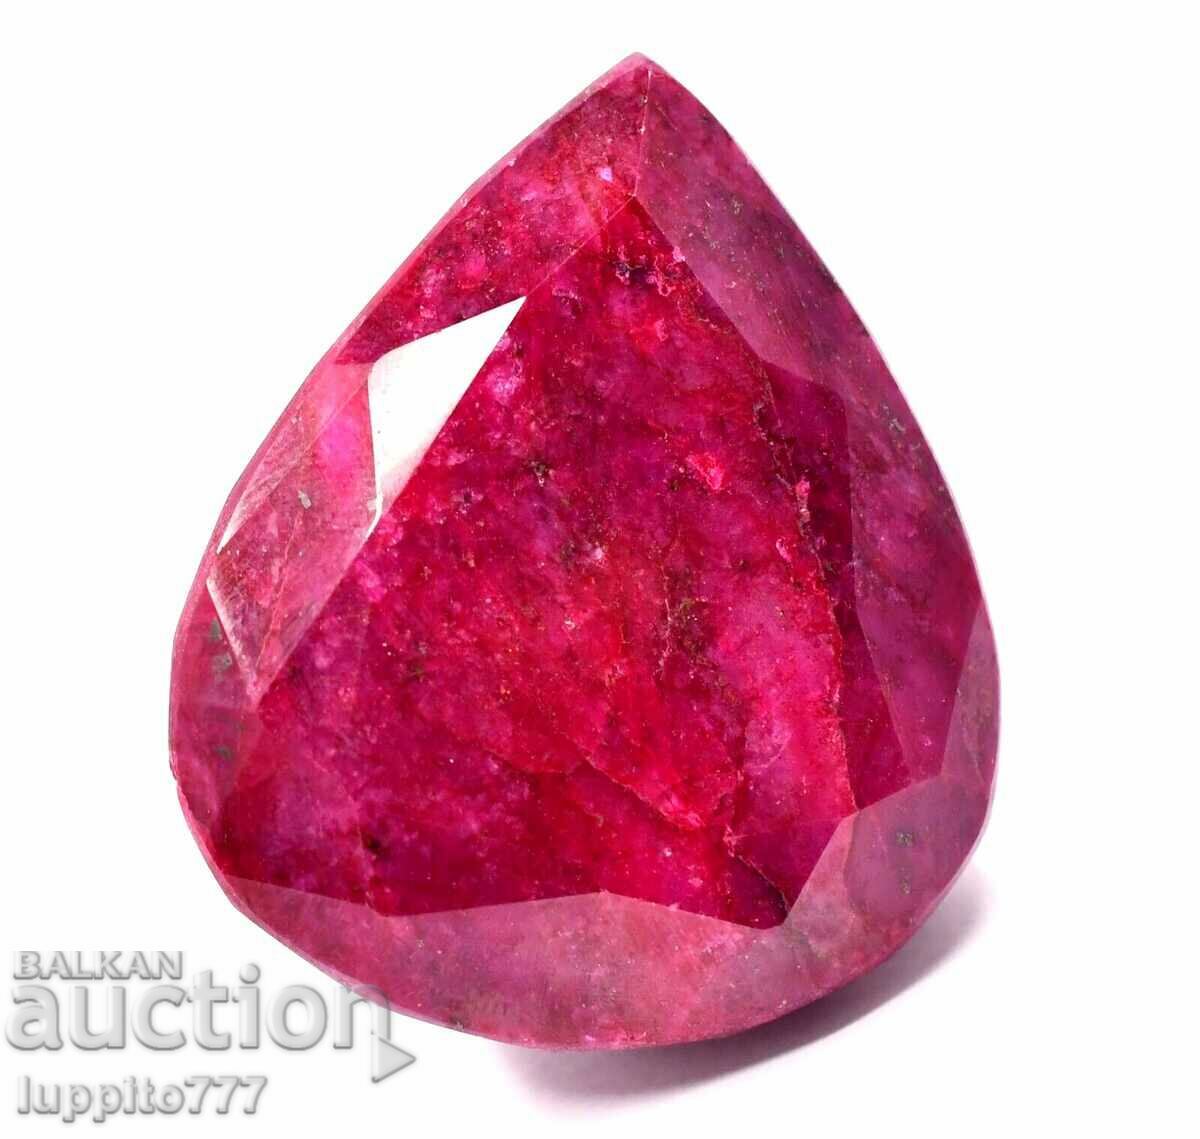 437.00 ct natural RUBY with AGSL certificate